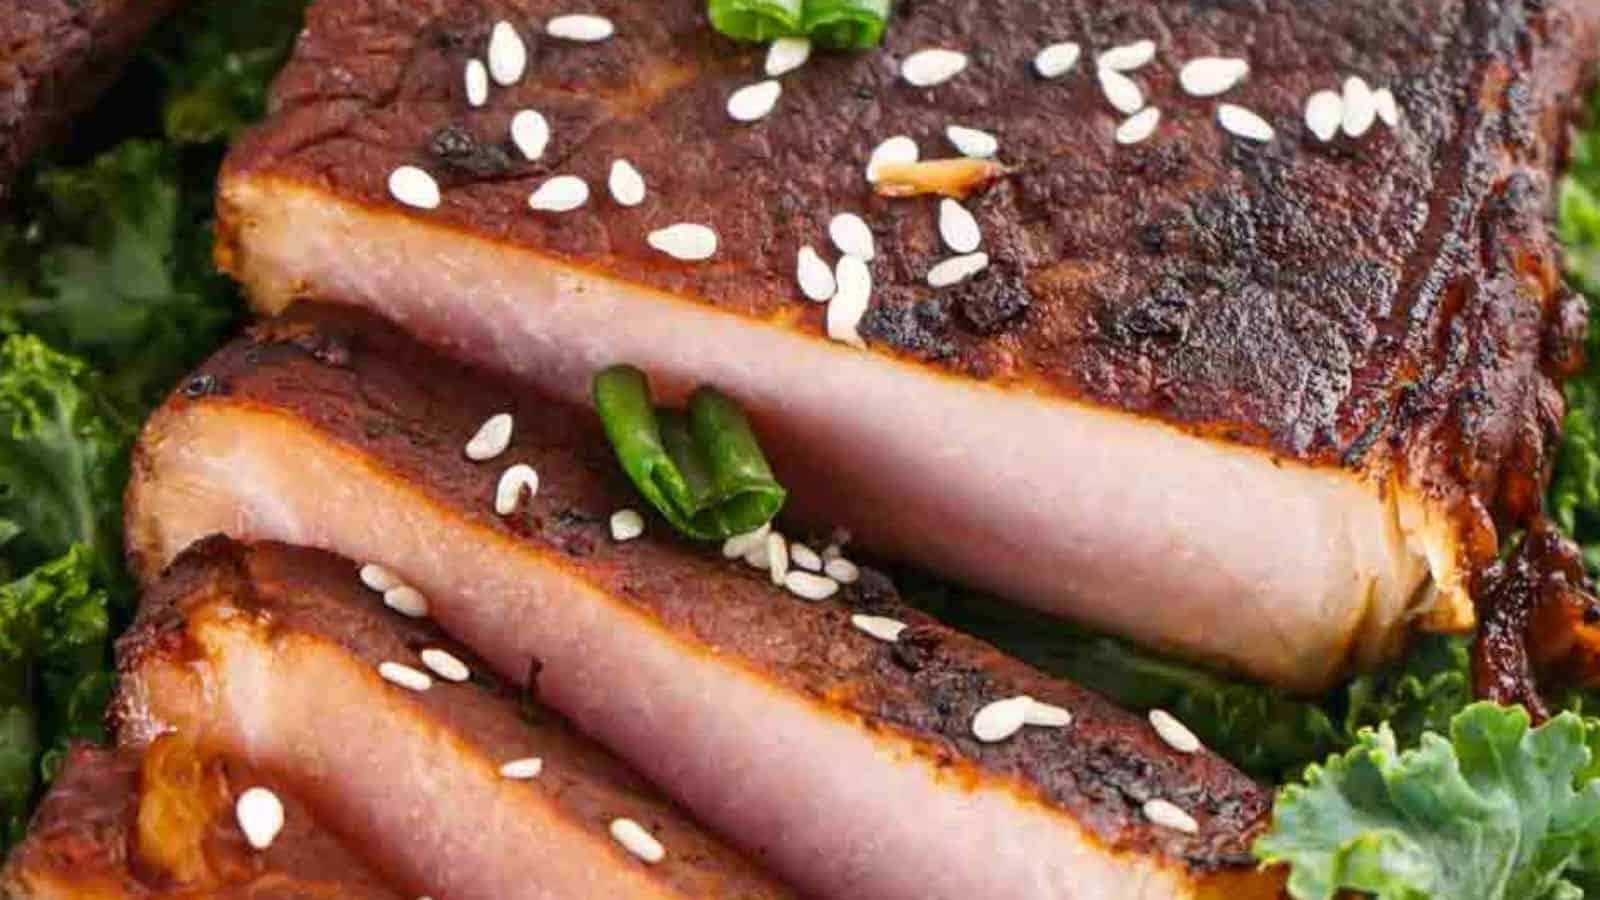 Close-up of sliced grilled pork belly garnished with sesame seeds and green chili, served on a bed of kale.